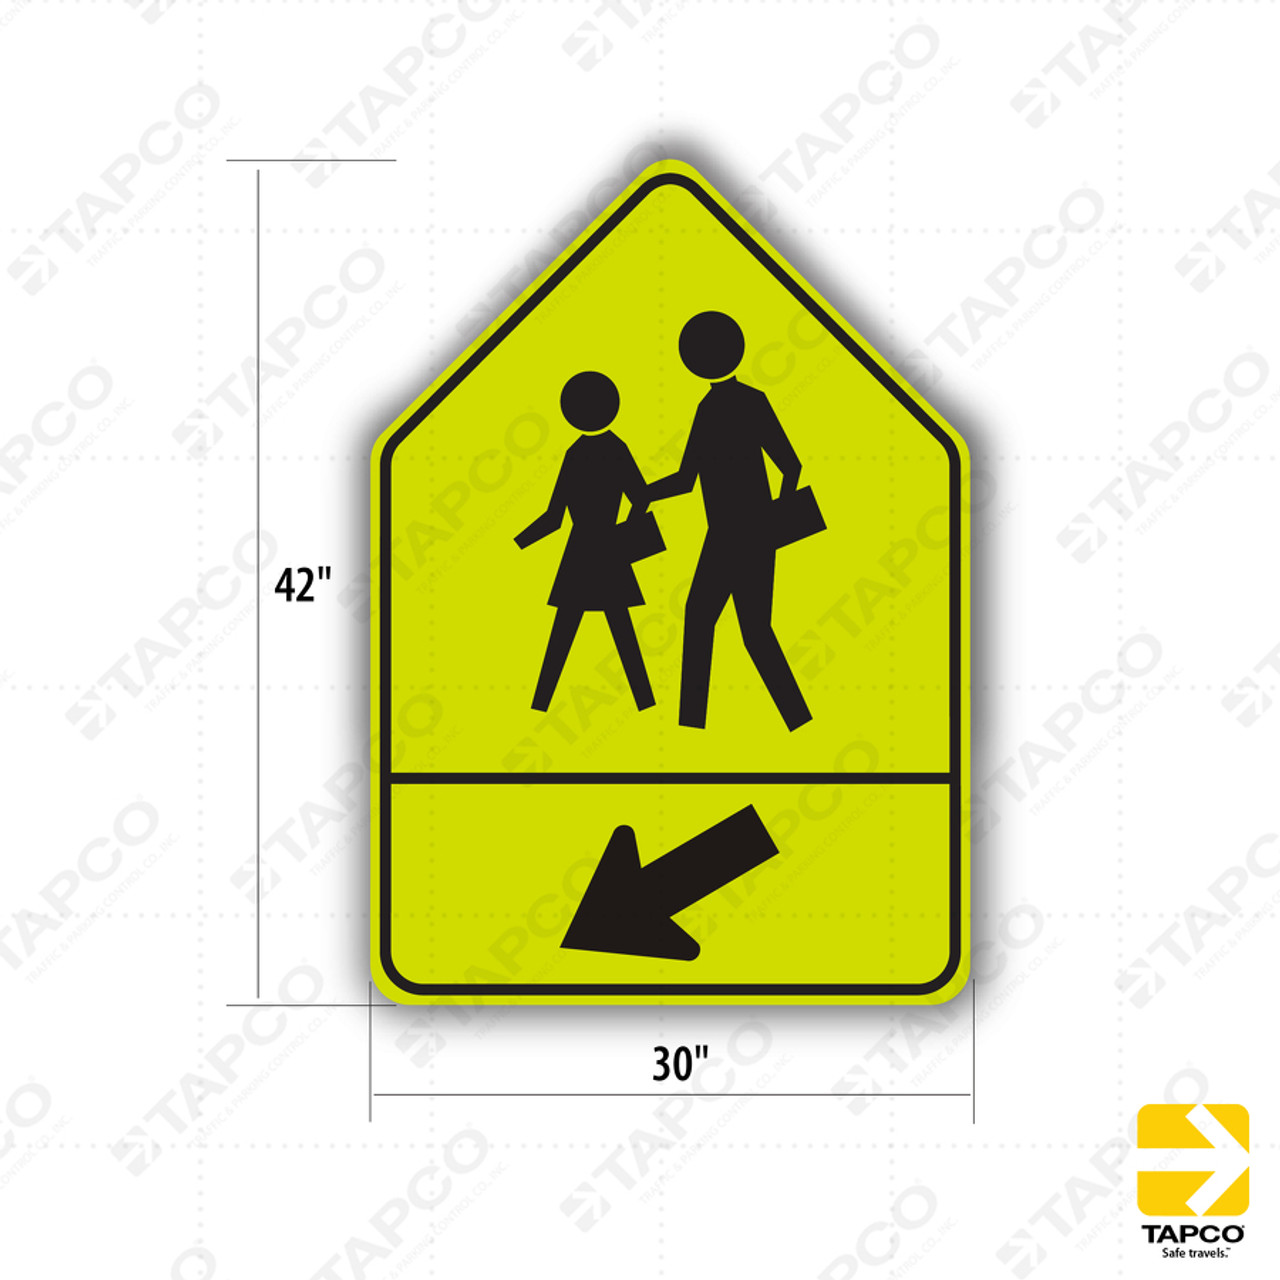 People Crossing Road Warning Sign - 24x18 - (CA) W54-Special